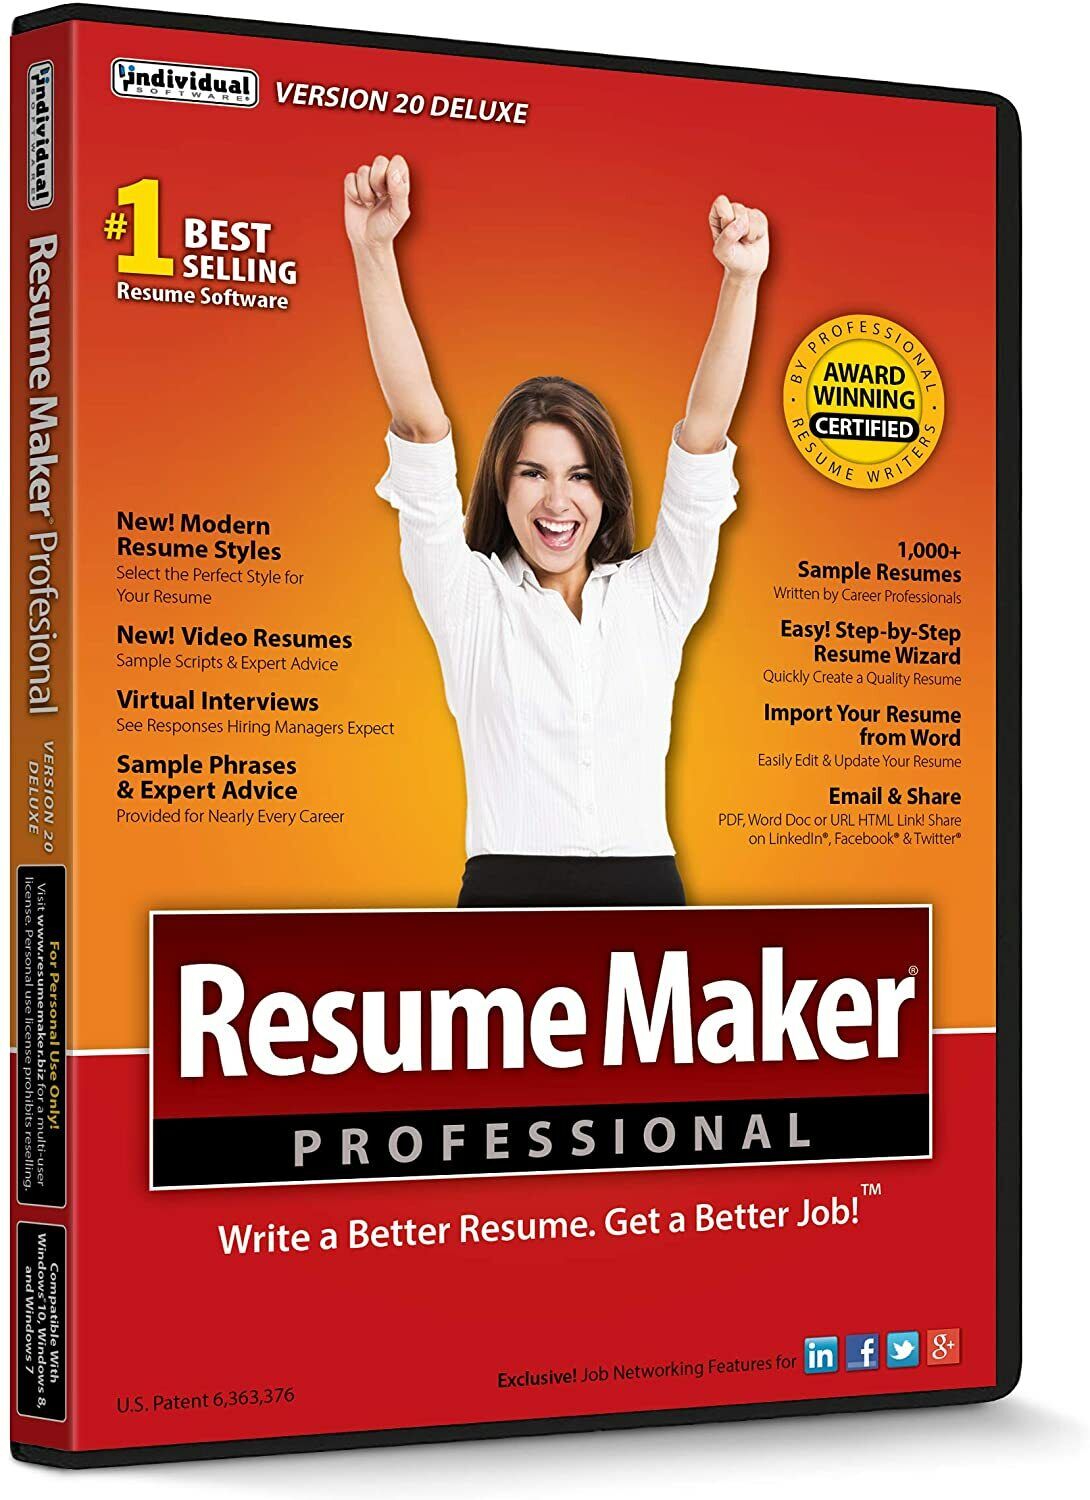 Resume Maker Professional Deluxe 20 PC NEW